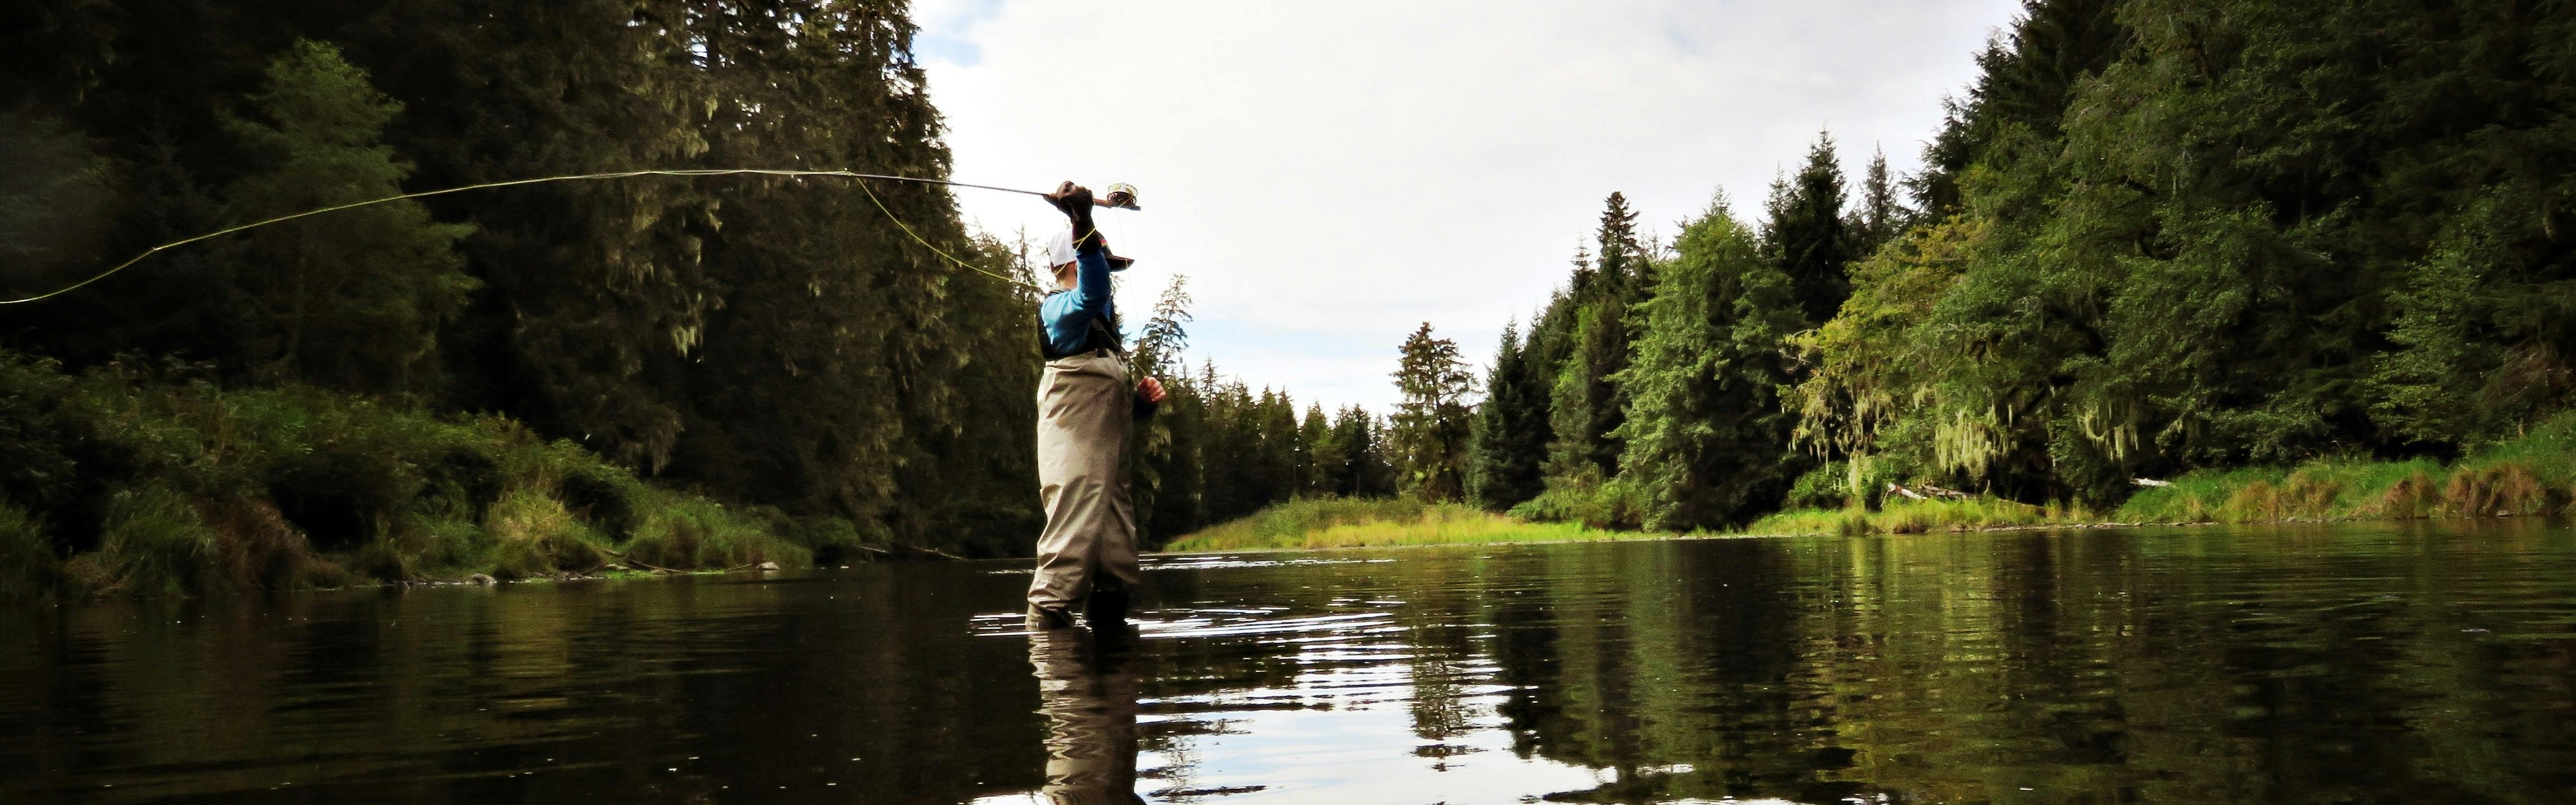 A man in waders casts a fly fishing rod